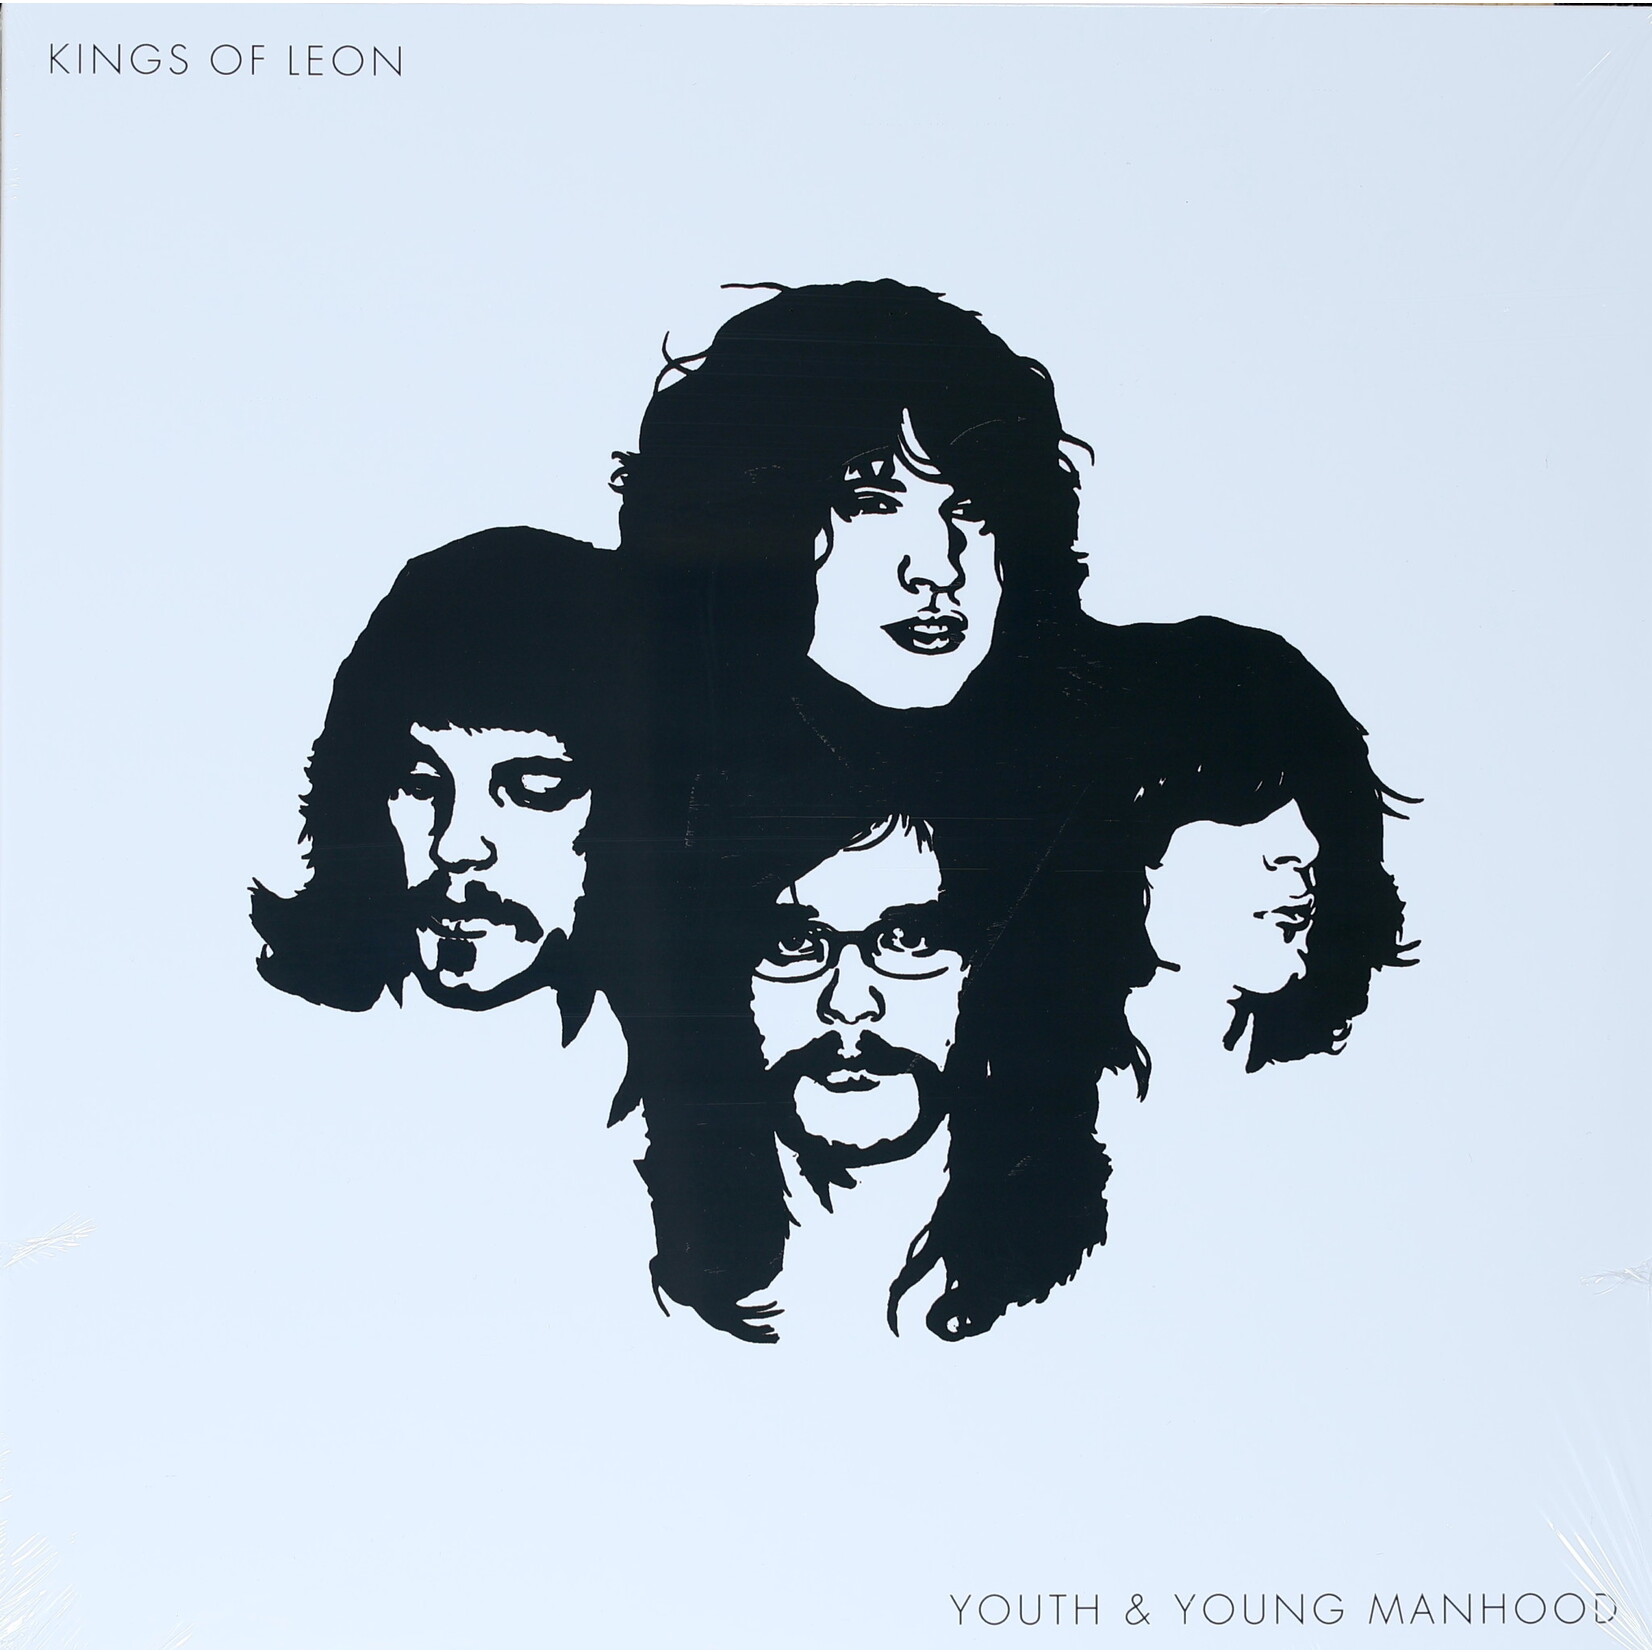 KINGS OF LEON - YOUTH AND YOUNG MANHOOD - GATEFOLD 2LP